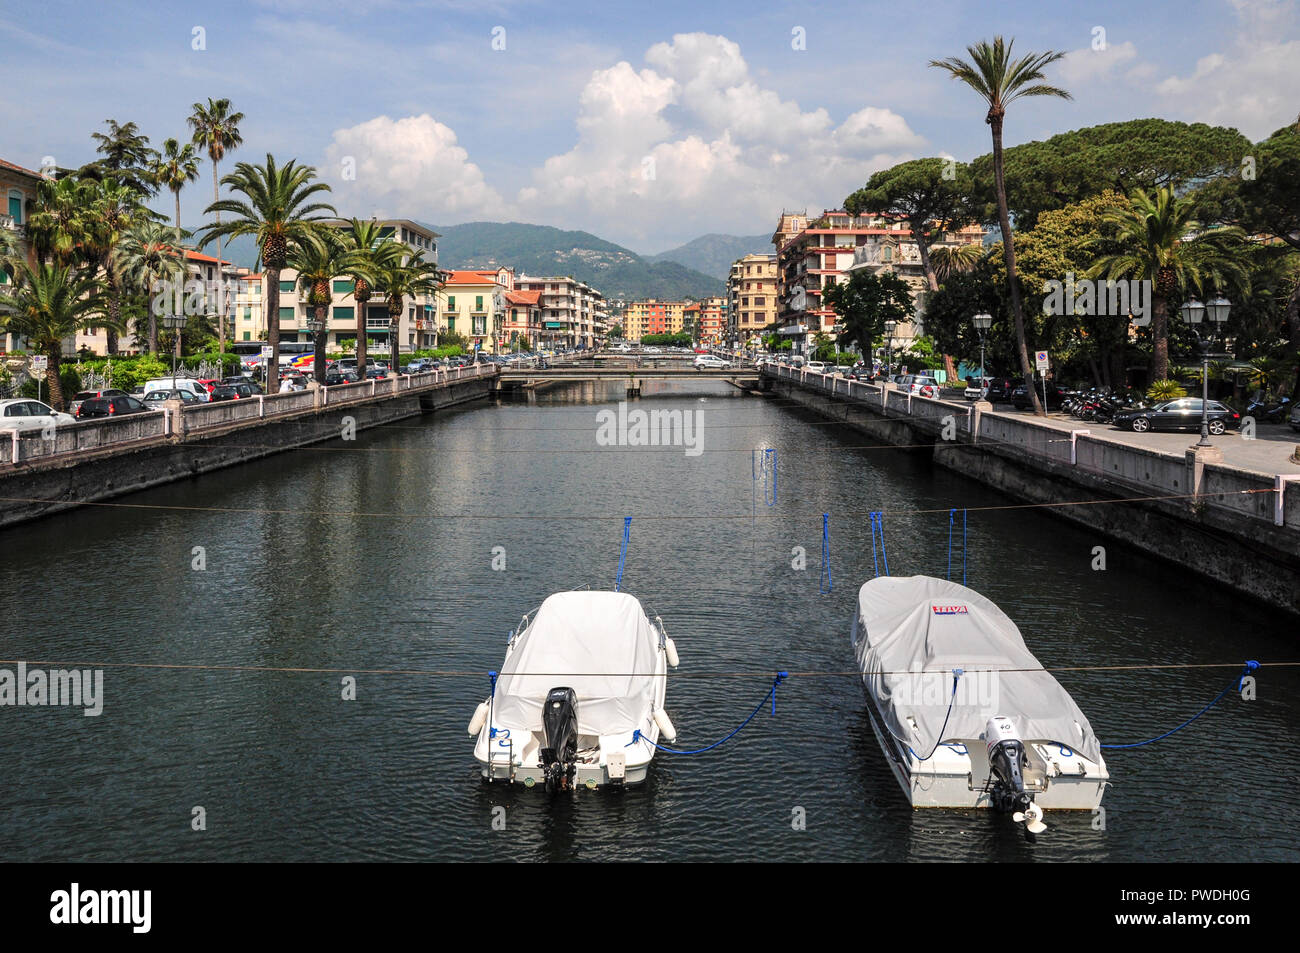 River / Canal running through the town of Rapallo Stock Photo